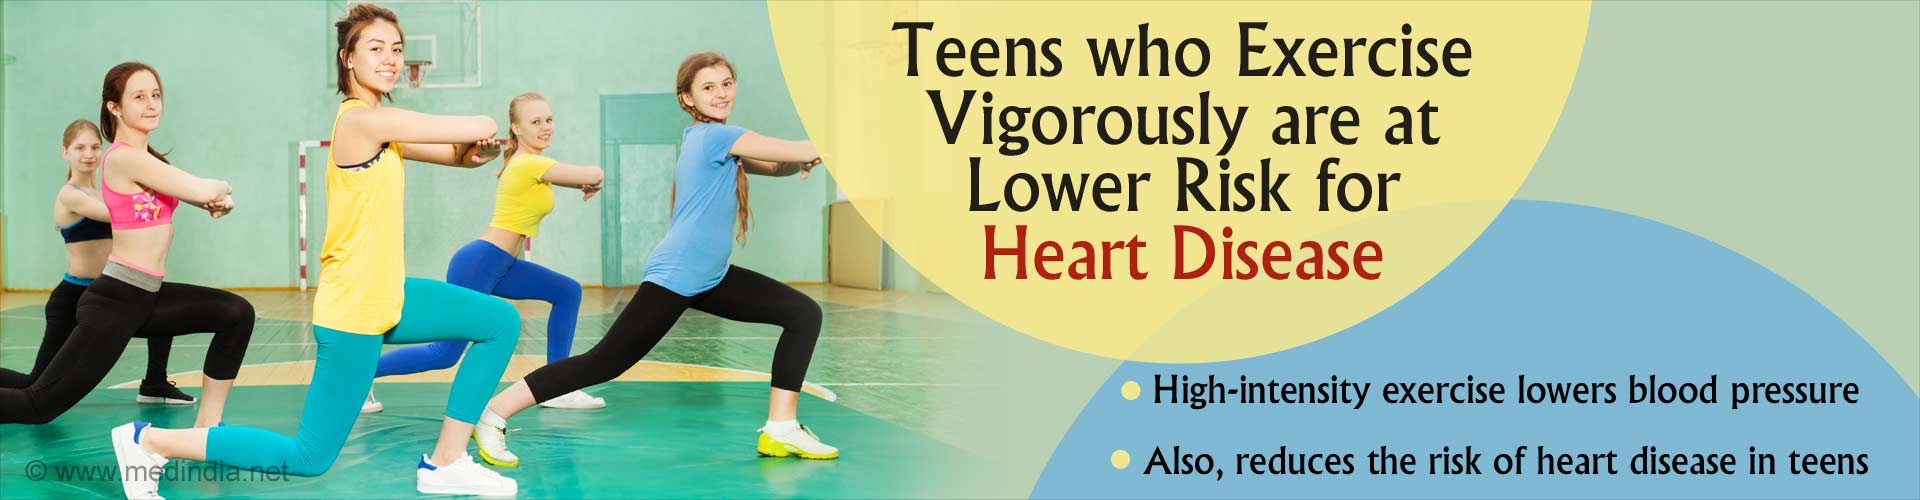 Teens who exercise vigorously are at lower risk for heart disease. High-intensity exercise lowers blood pressure. Also, reduces the risk of heart disease in teens.
